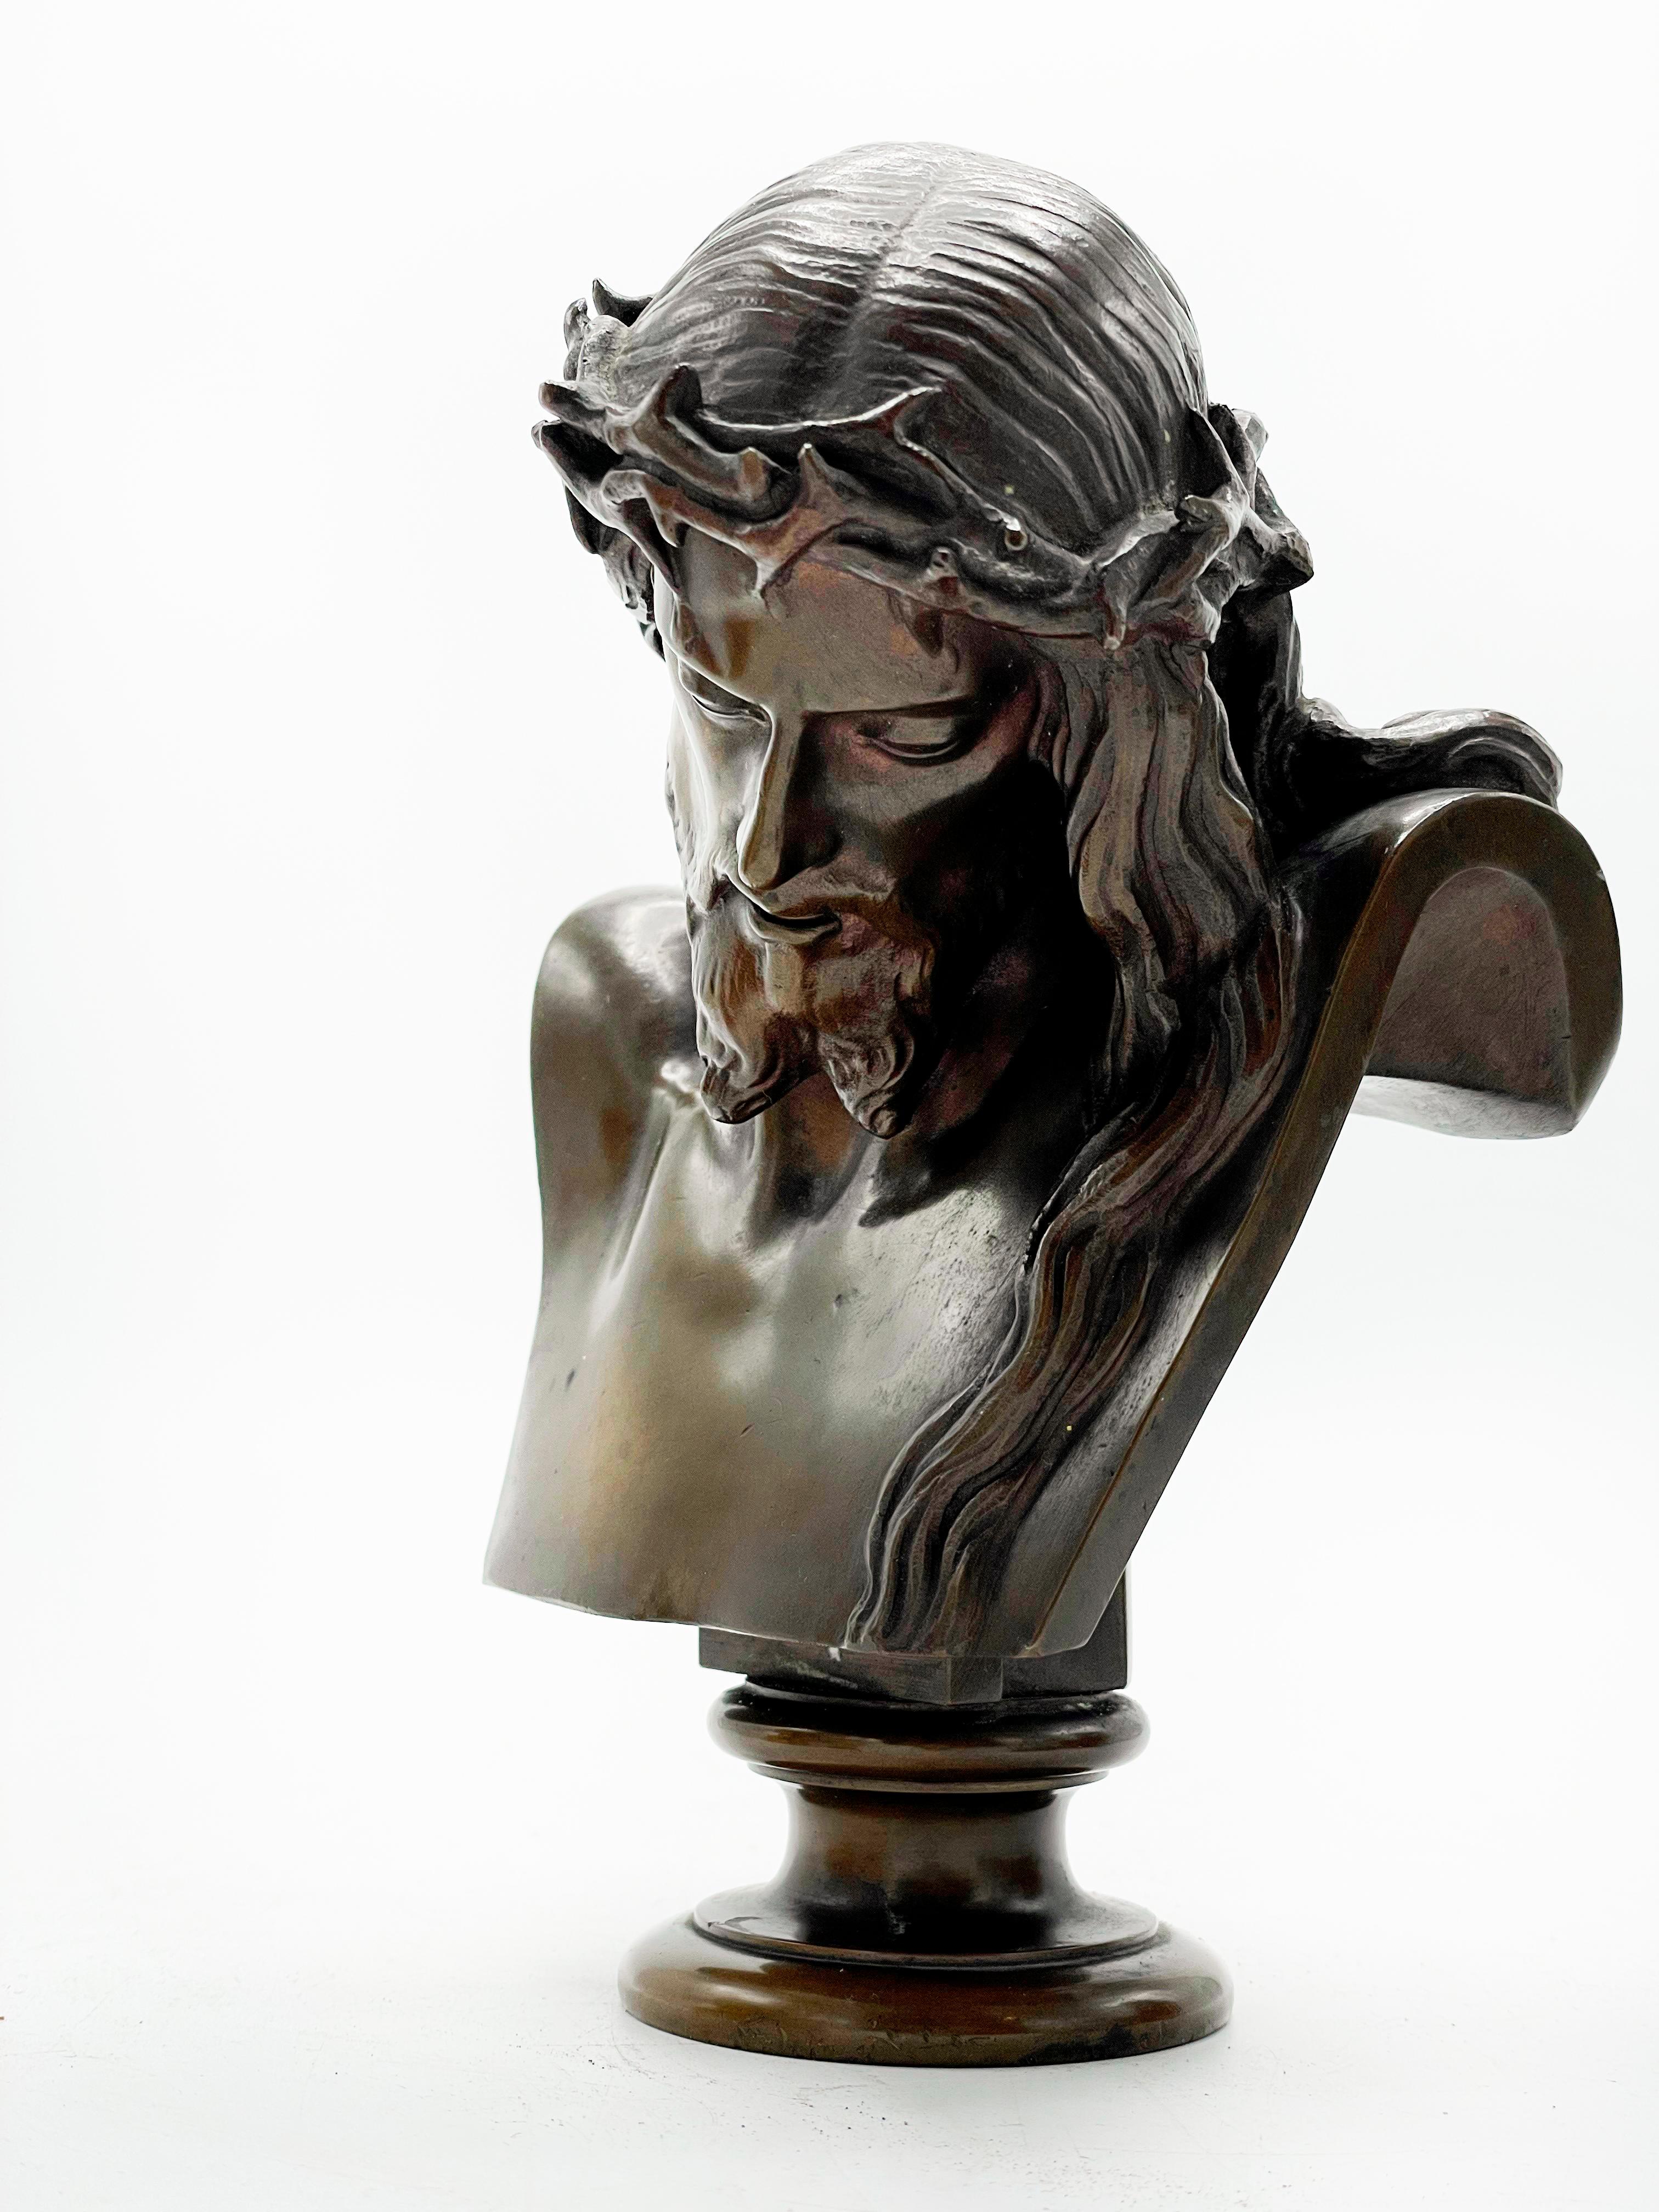 Jean-Baptiste Auguste Clesinger, French Bronze Bust of Jesus Christ, Barbedienne
1858
An exceptional French patinated realistic miniature bronze bust of Jesus Christ, 1858

Signed: J CLESINGER. 1858 and F. BARBEDIENNE FONDEUR, with the Reduction